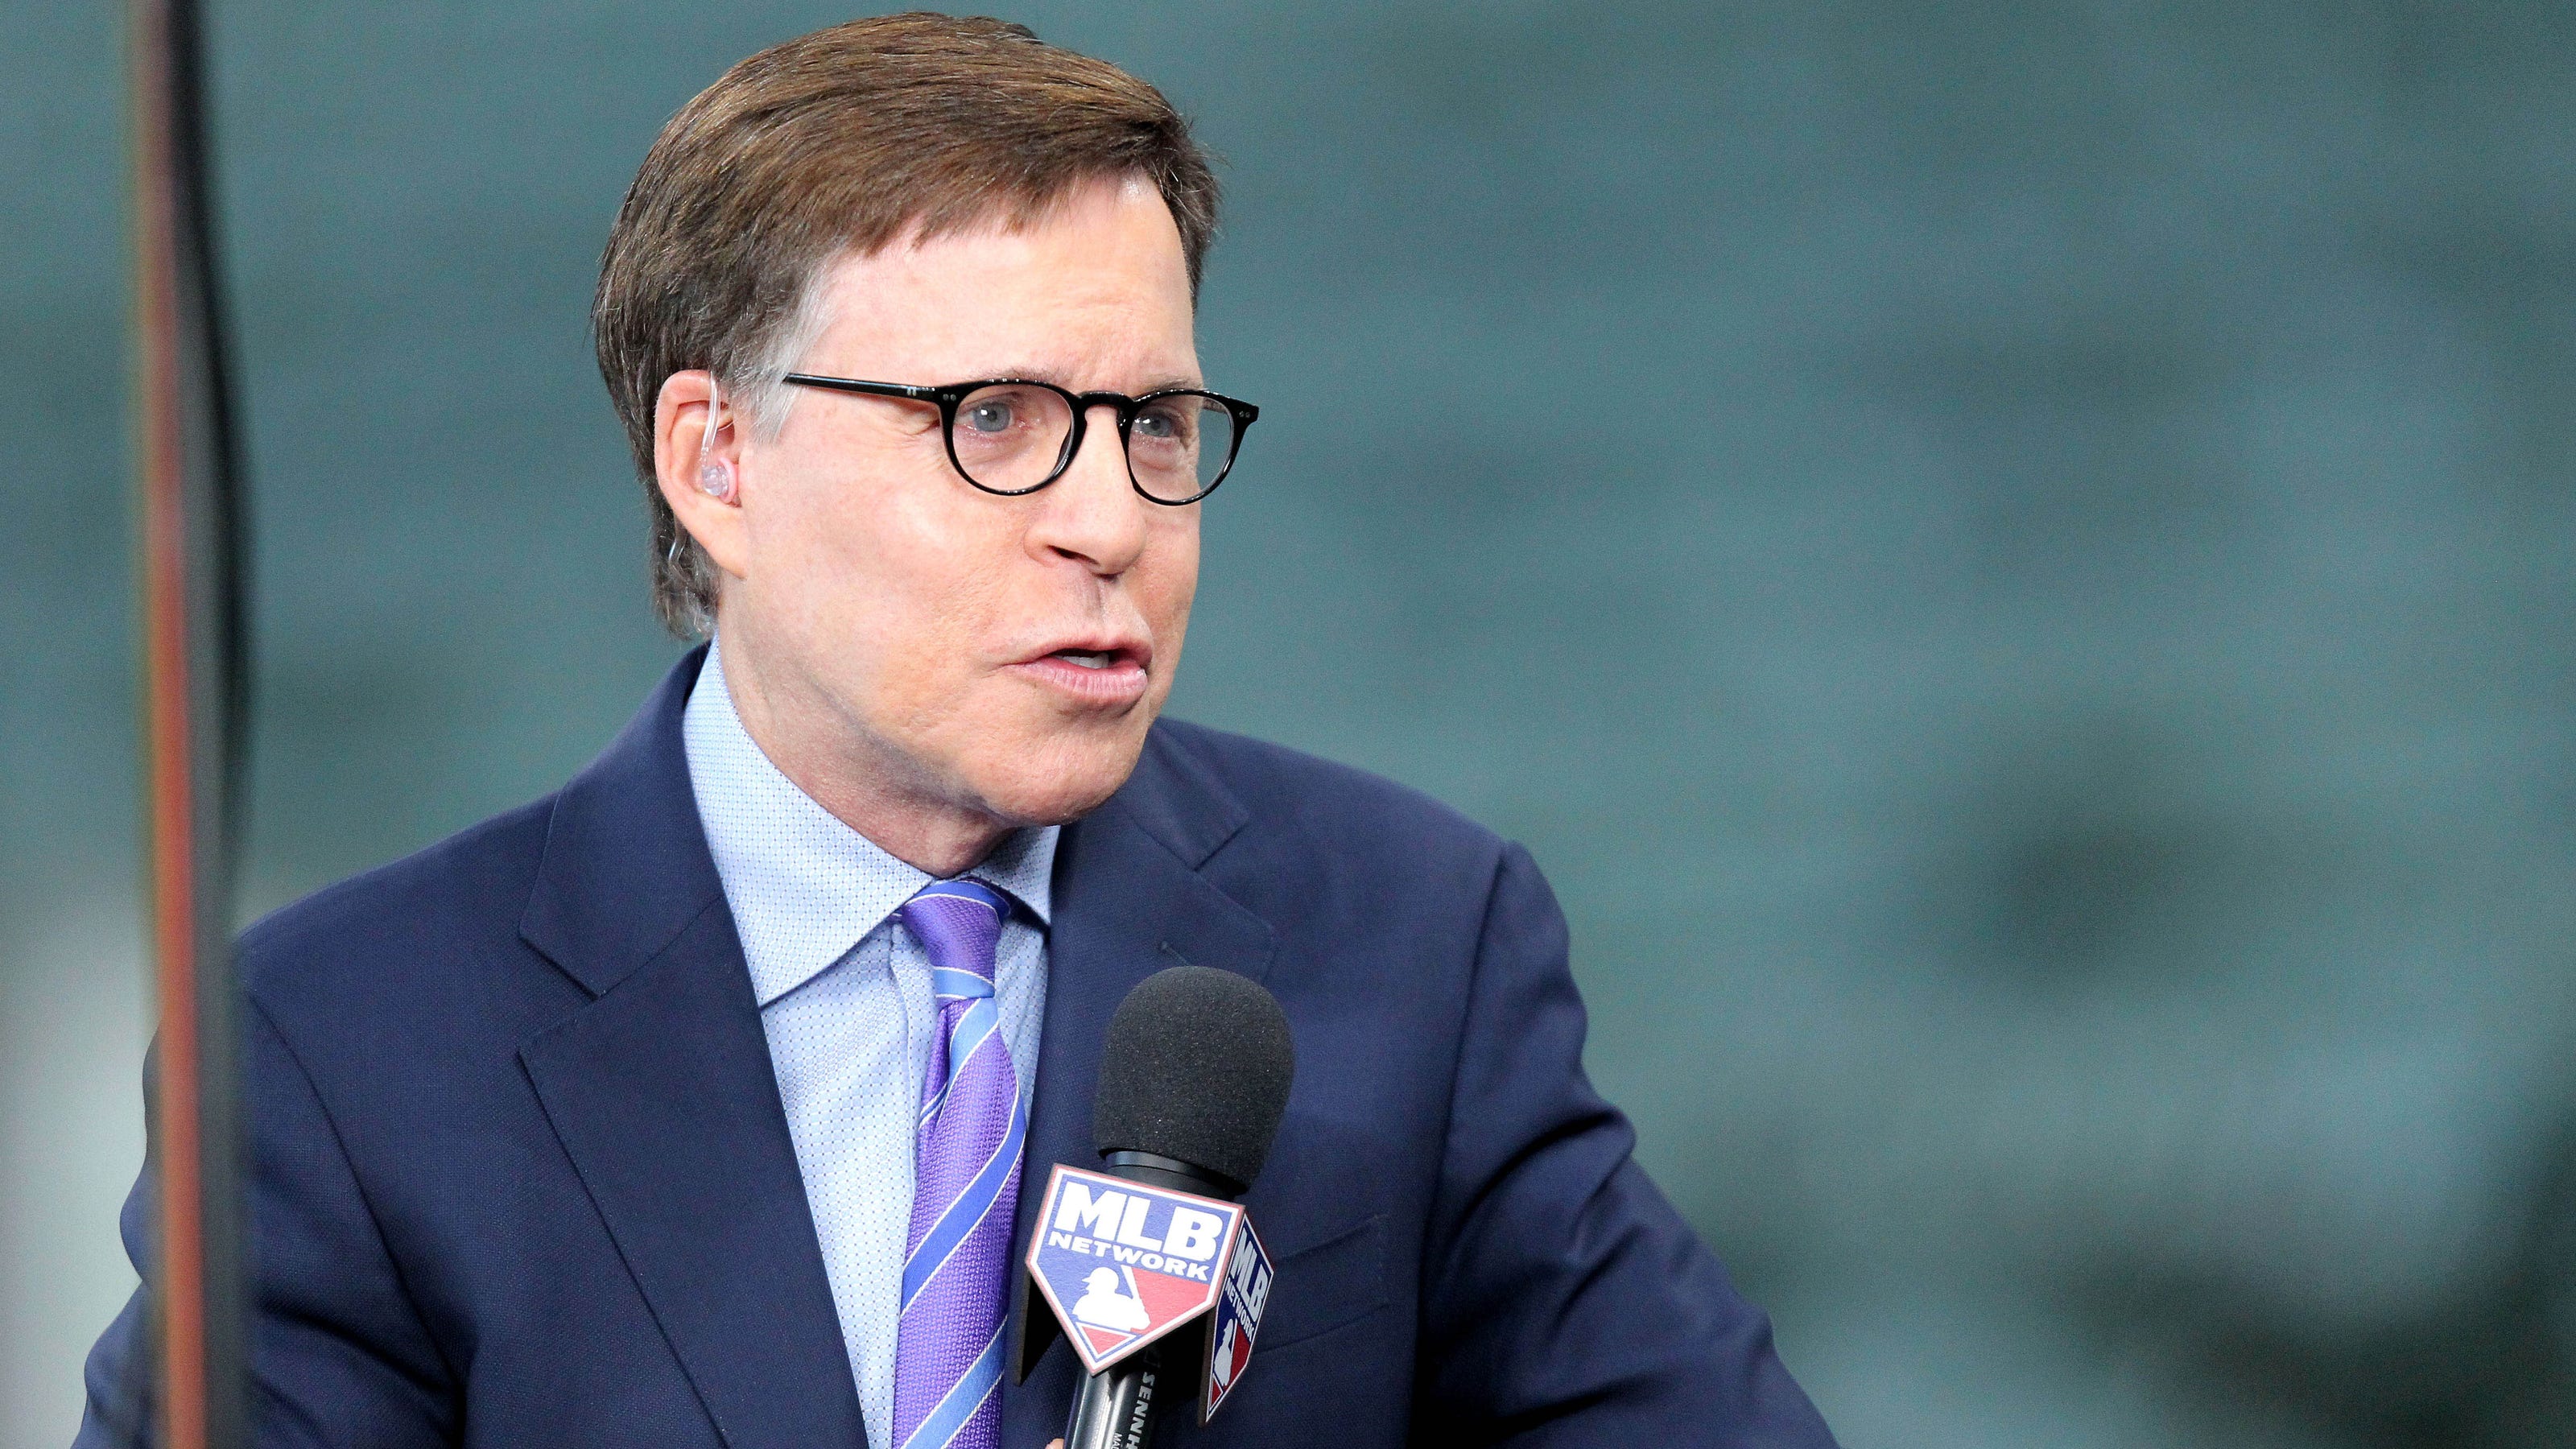 'They can't bang on trashcans anymore': Bob Costas angers Houston Astros fans